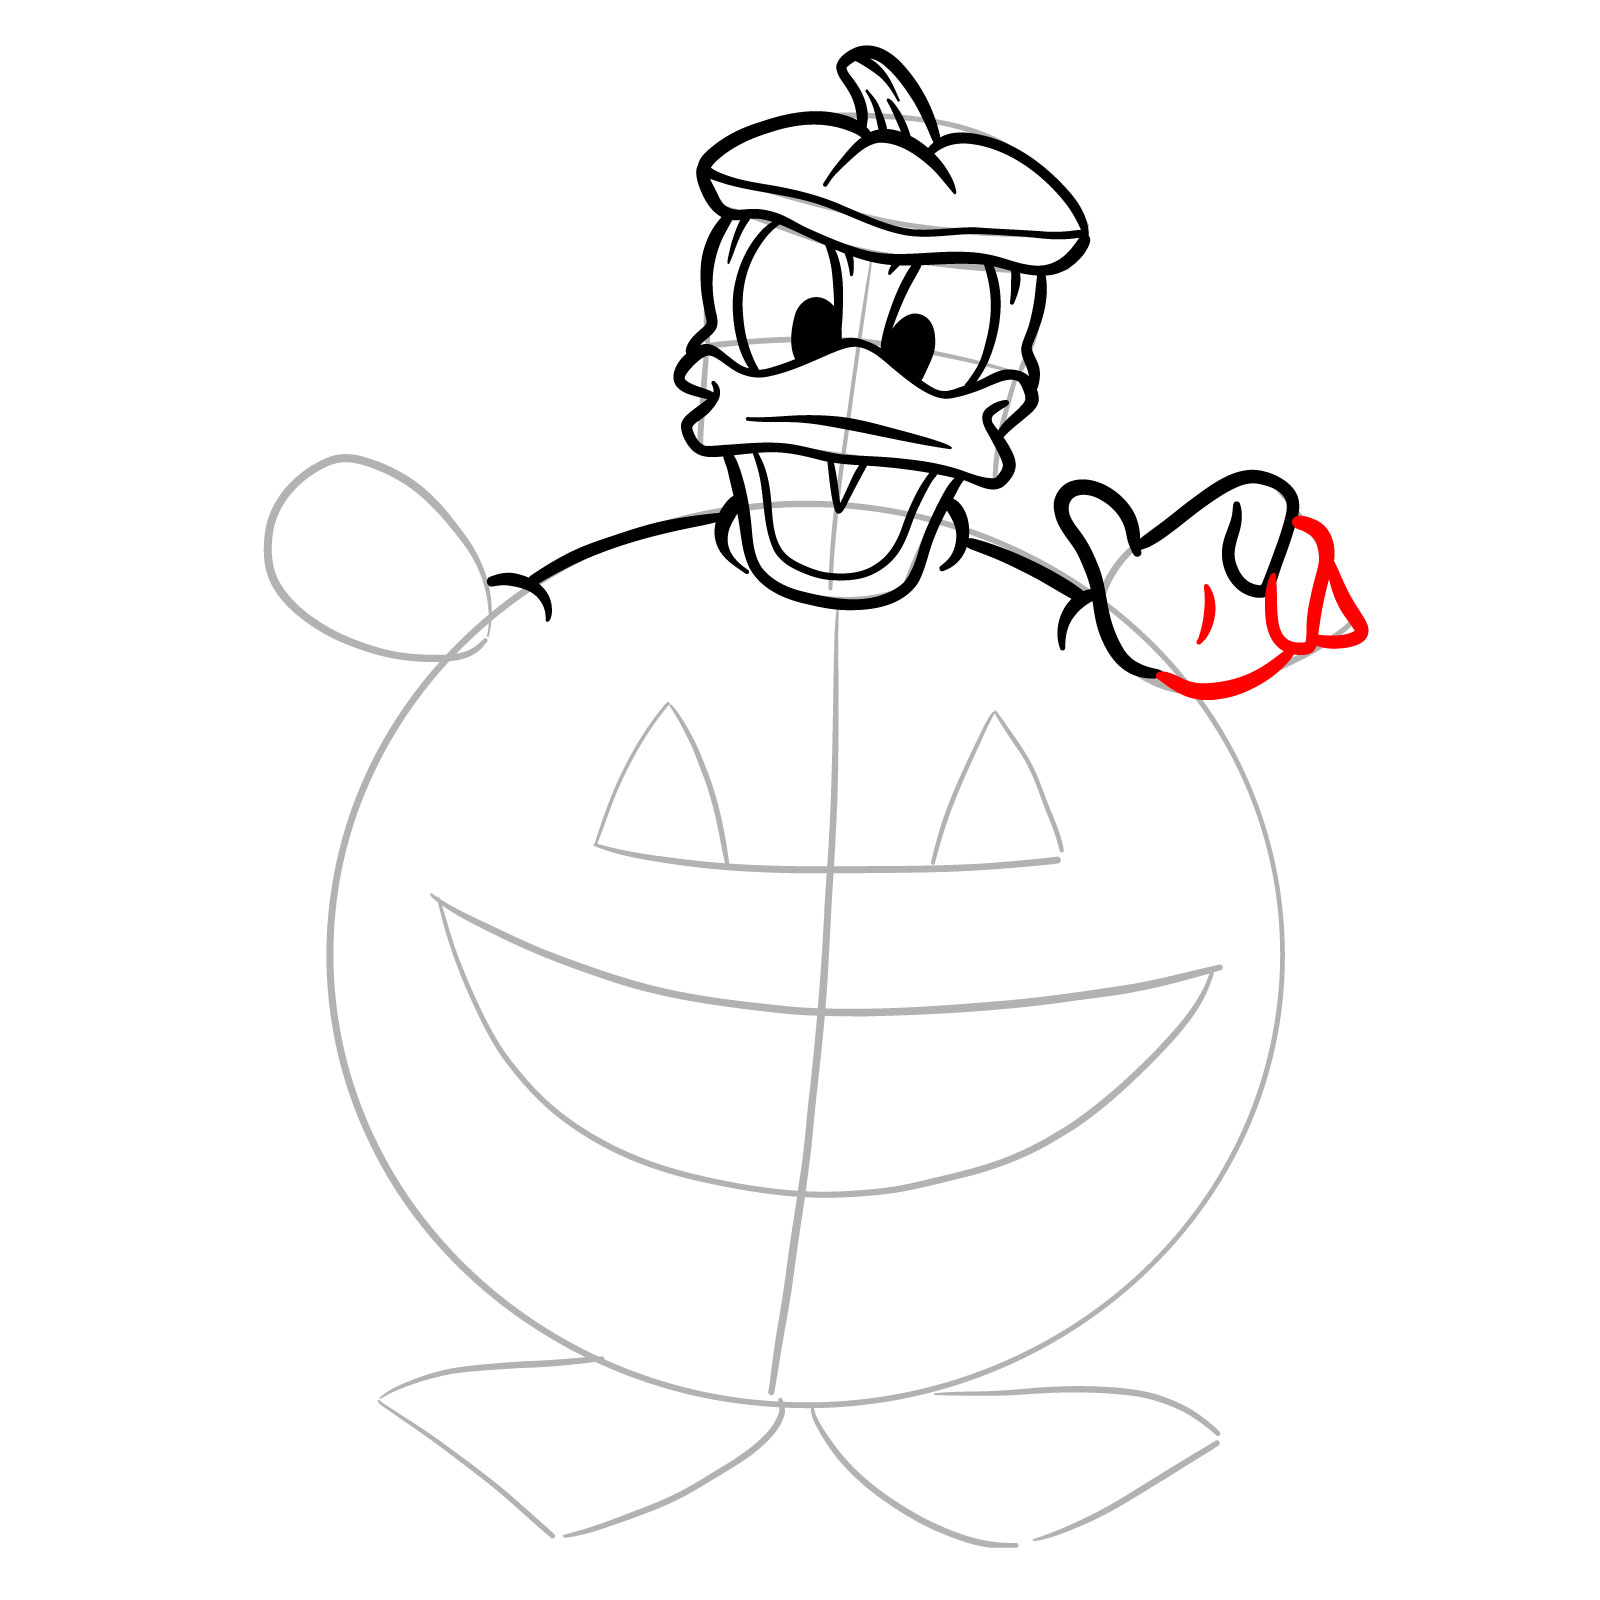 How to draw Halloween Donald Duck in a jack o'lantern - step 15